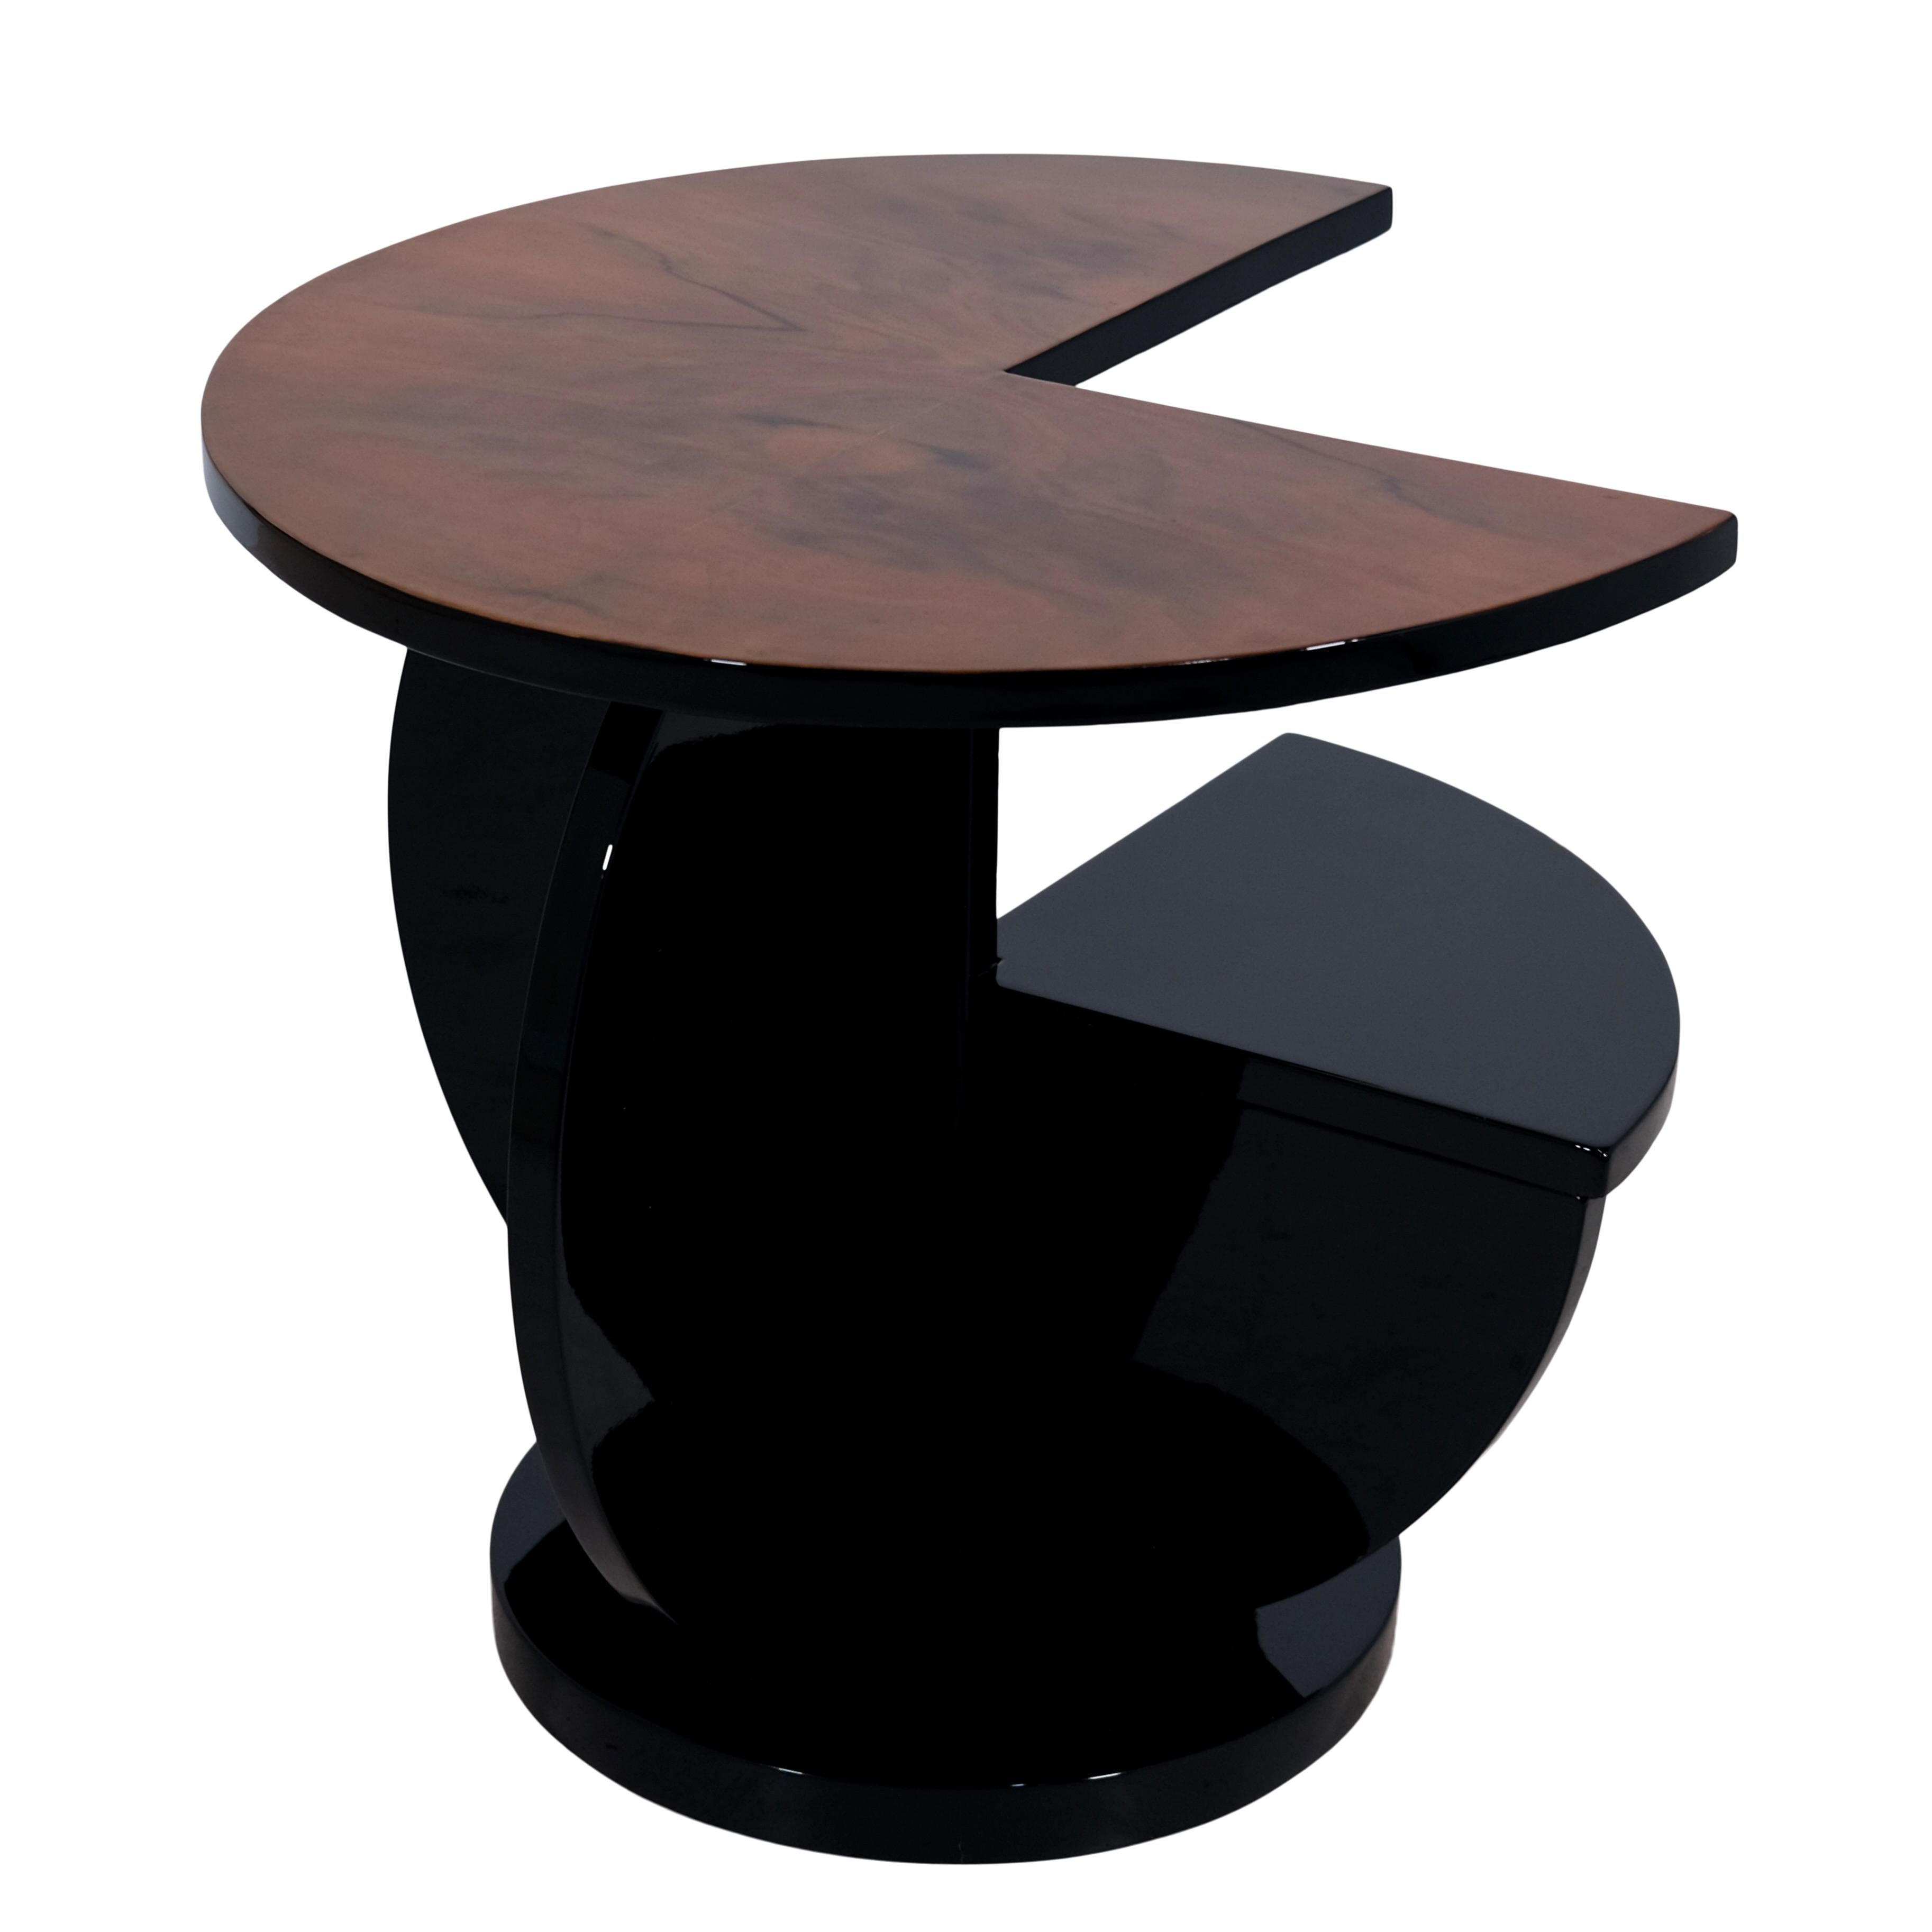 Round side table with notched segments
Nut wood and Black, high gloss lacquered 

Original Art Deco, France, 1930s

Dimensions: 
Diameter: 60 cm 
Height: 55 cm 